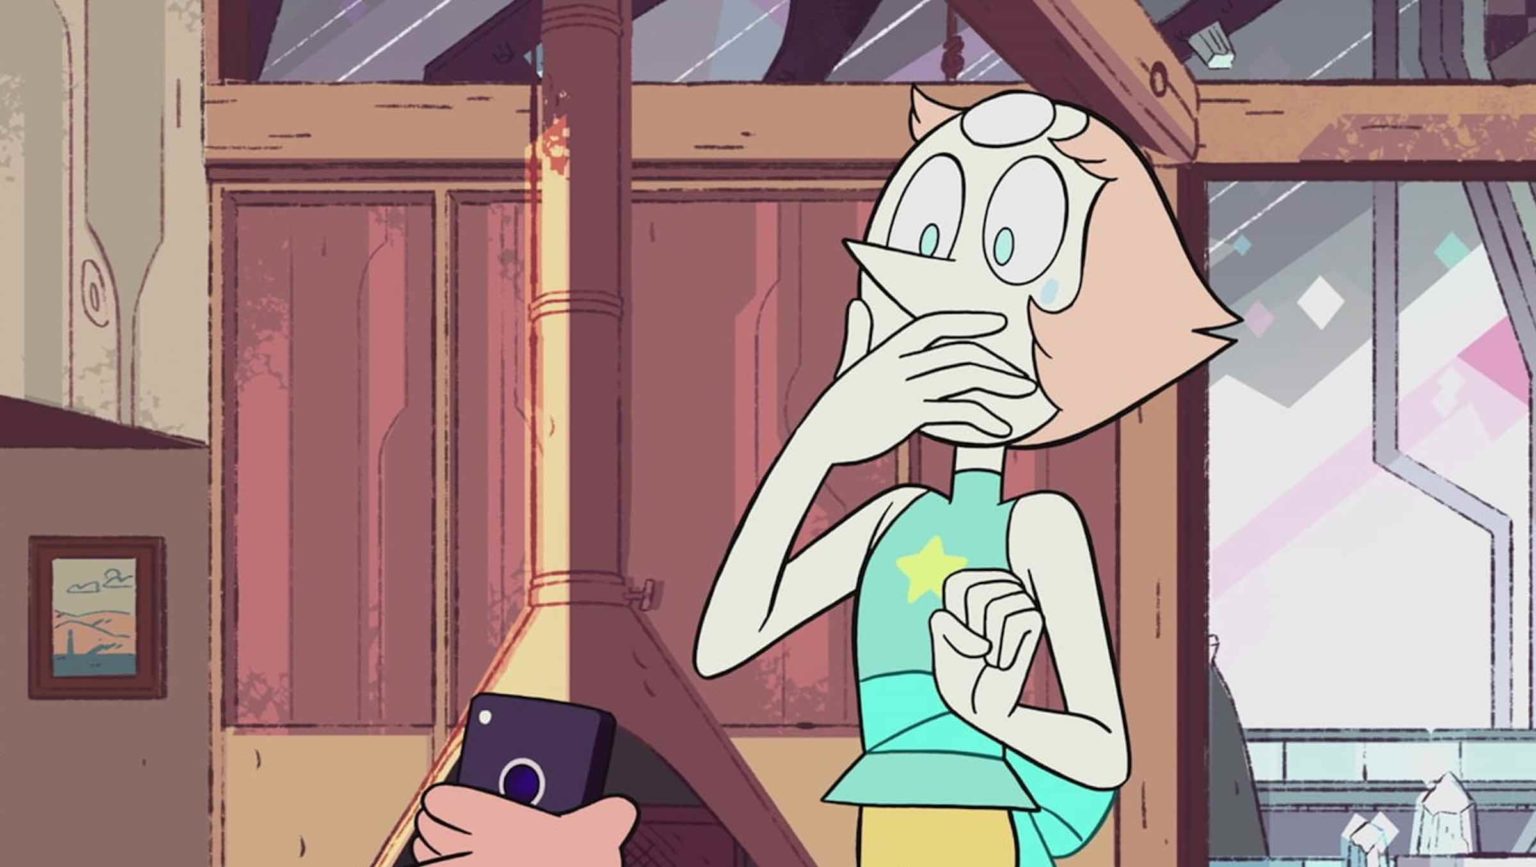 Pearl's perfect facial expressions, however, have made her the meme queen of 'Steven Universe'. Here are some of our favorite Pearl memes.